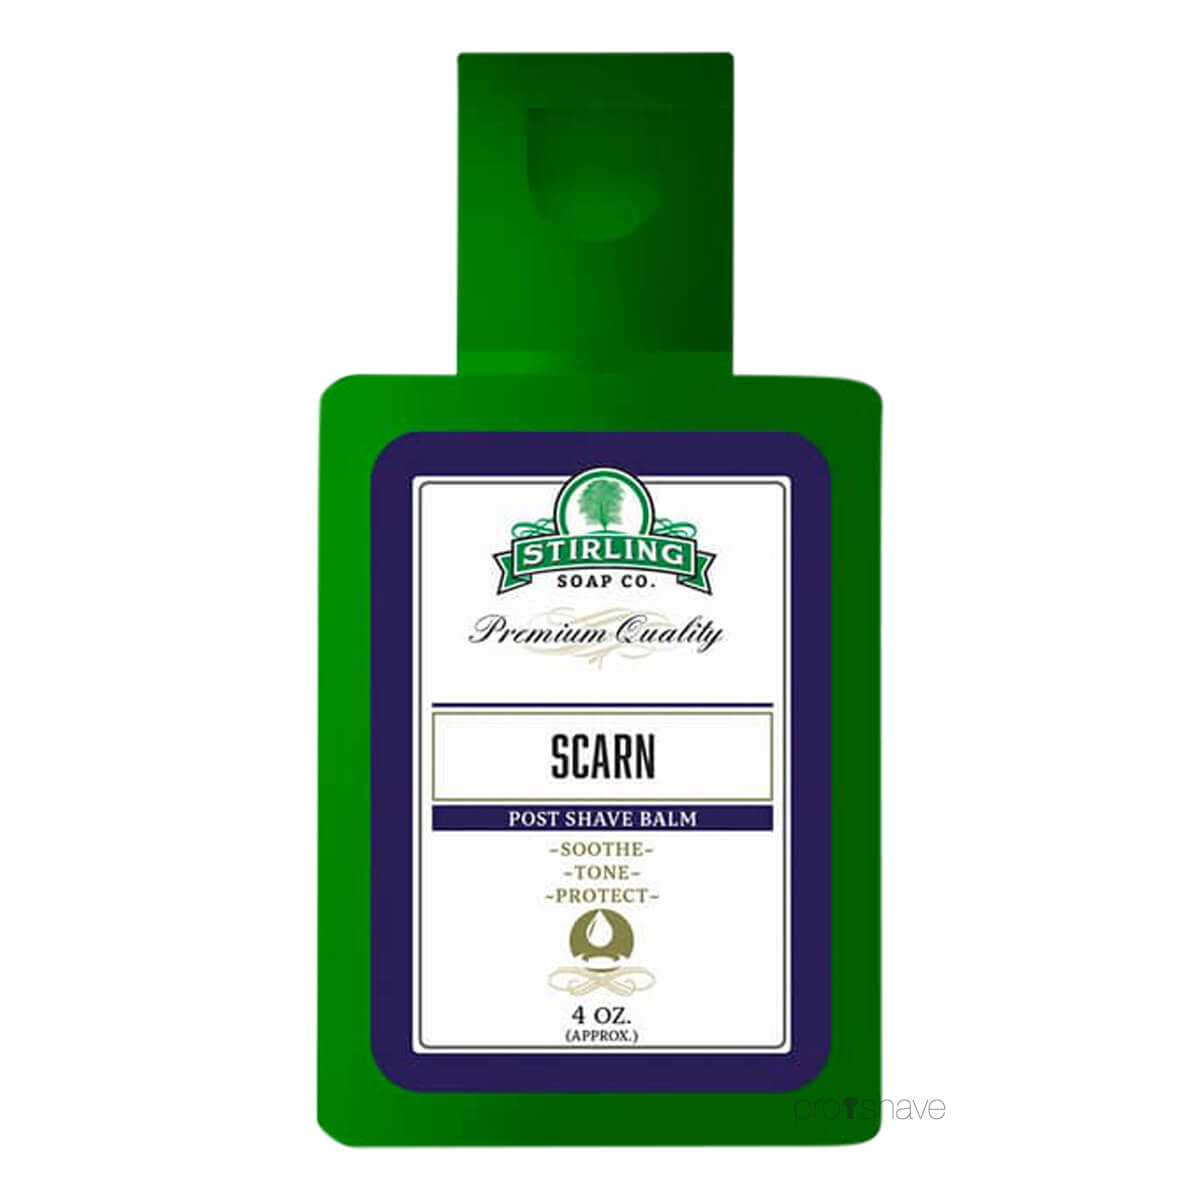 Stirling Soap Co. Aftershave Balm, Scarn, 118 ml.